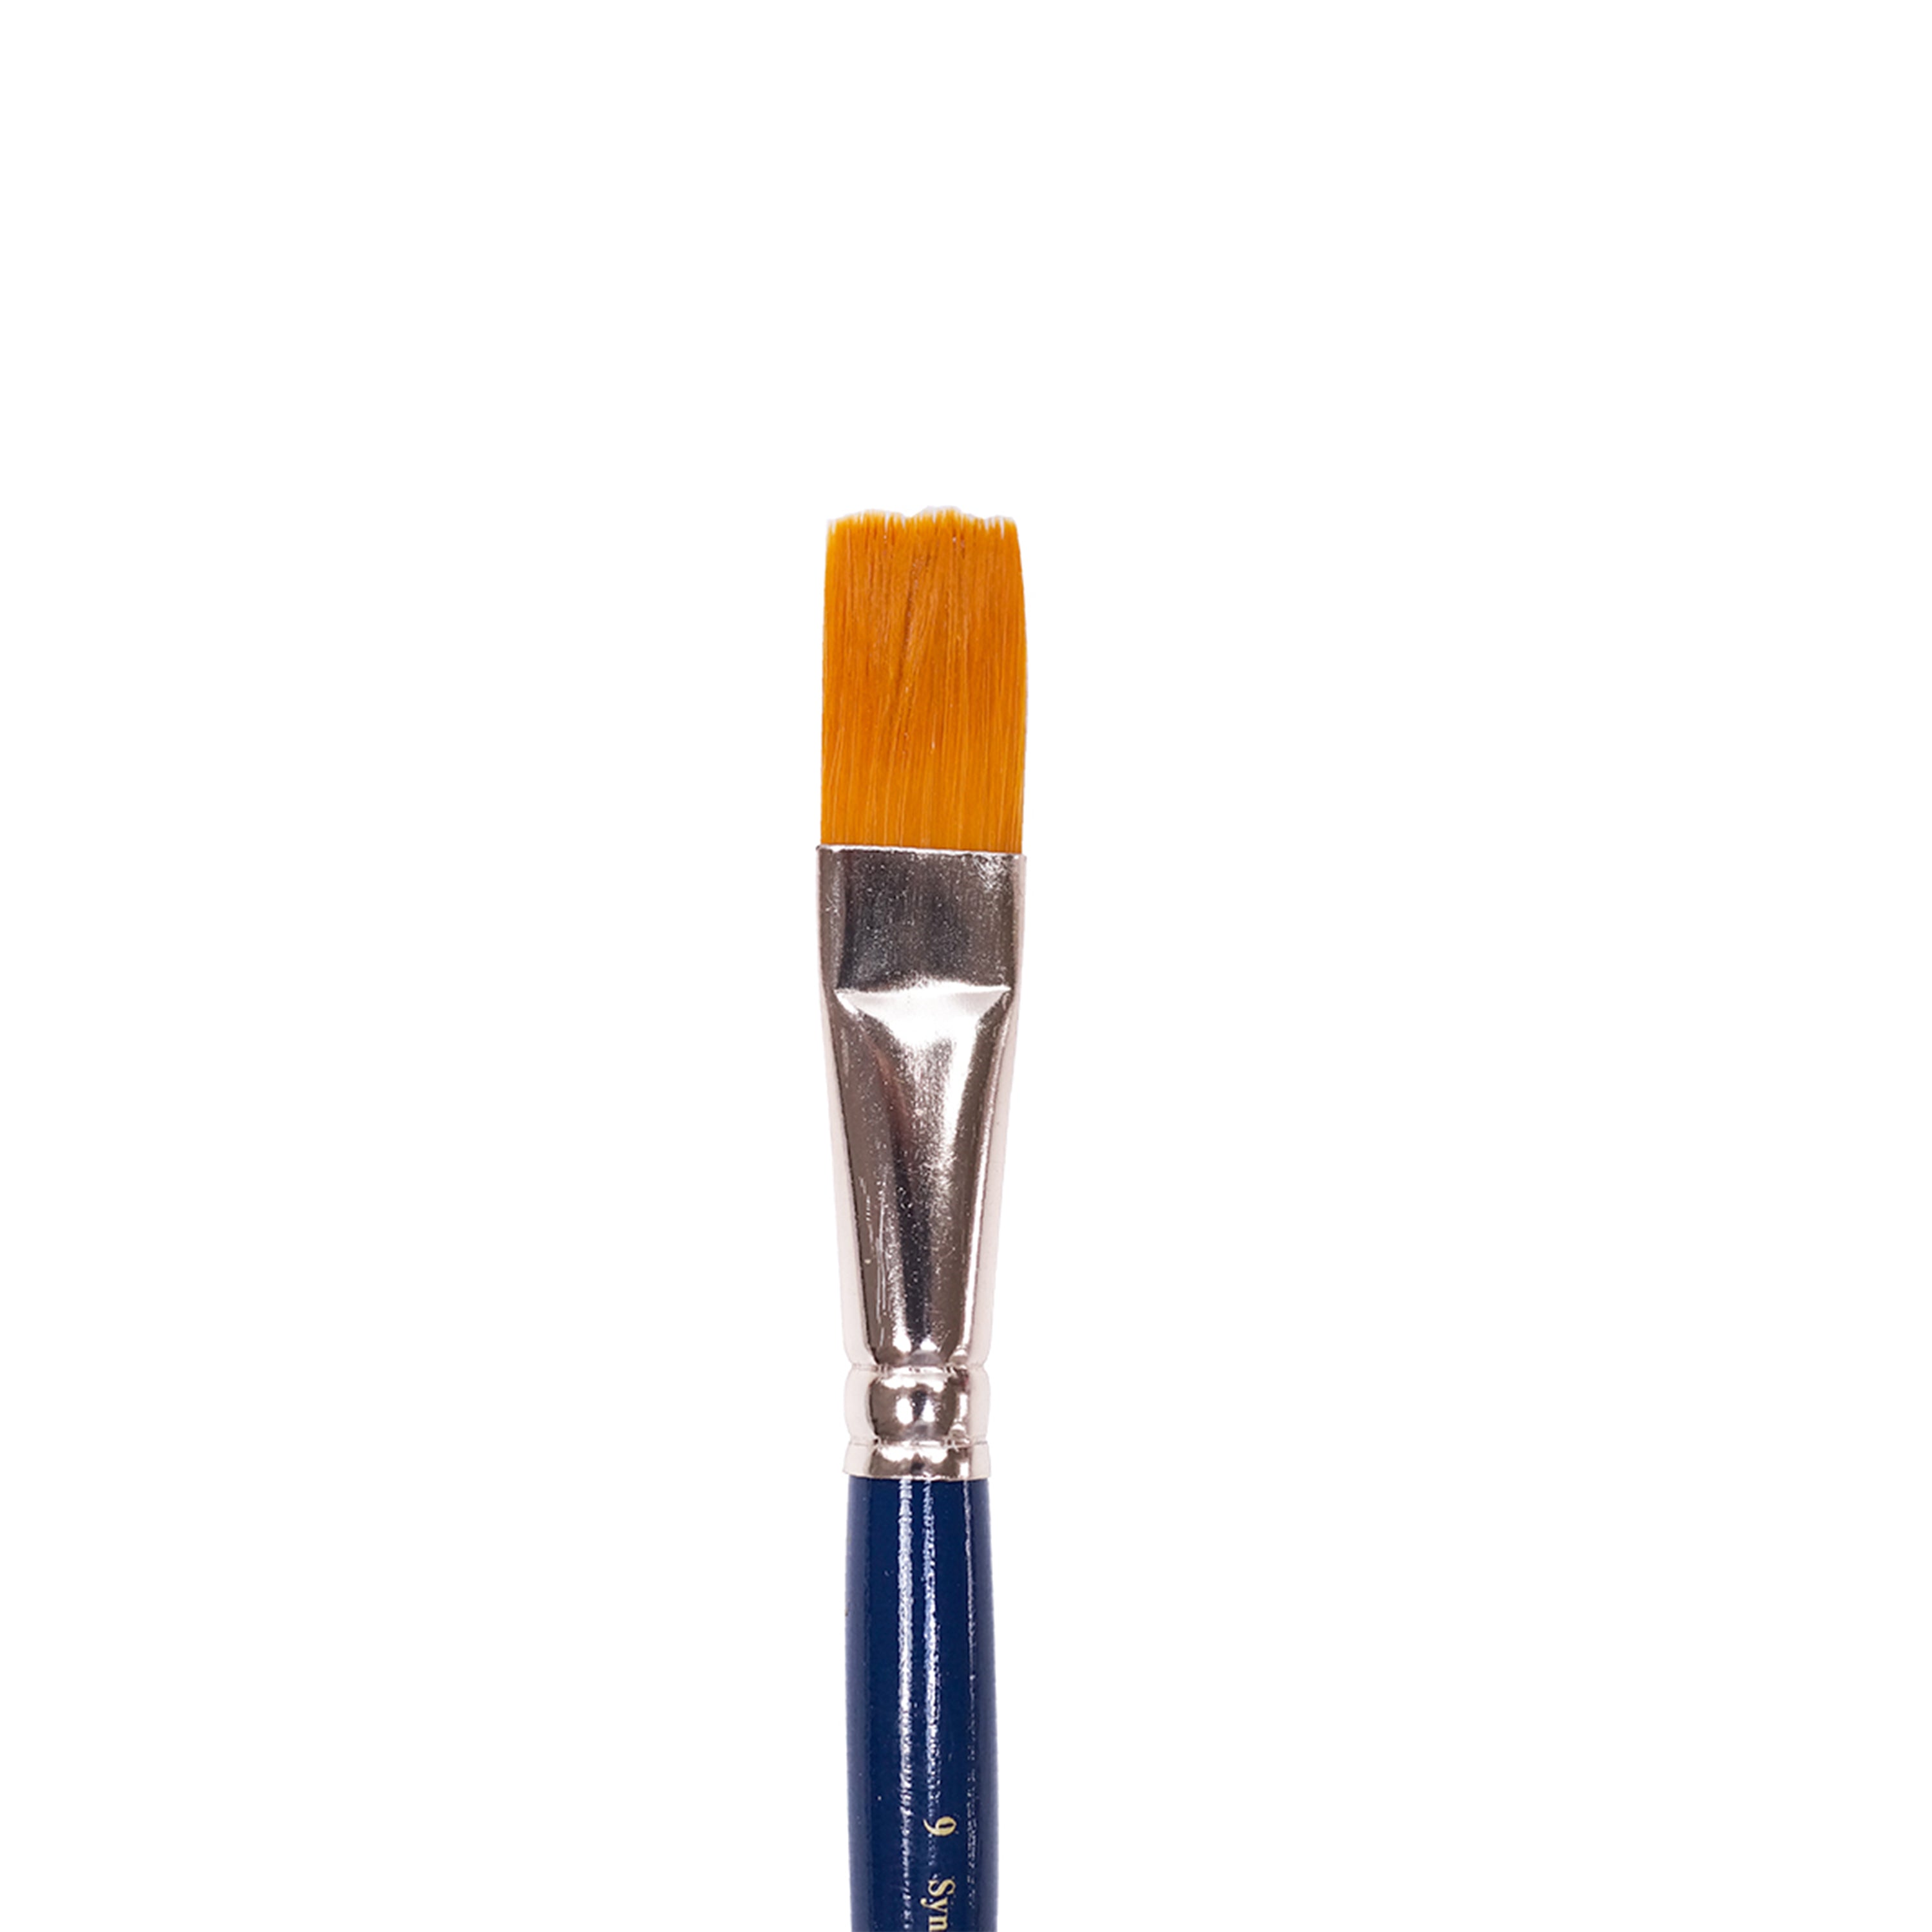 Faber Castell Paint Brush - Synthetic Hair Flat Size 9, 1pc